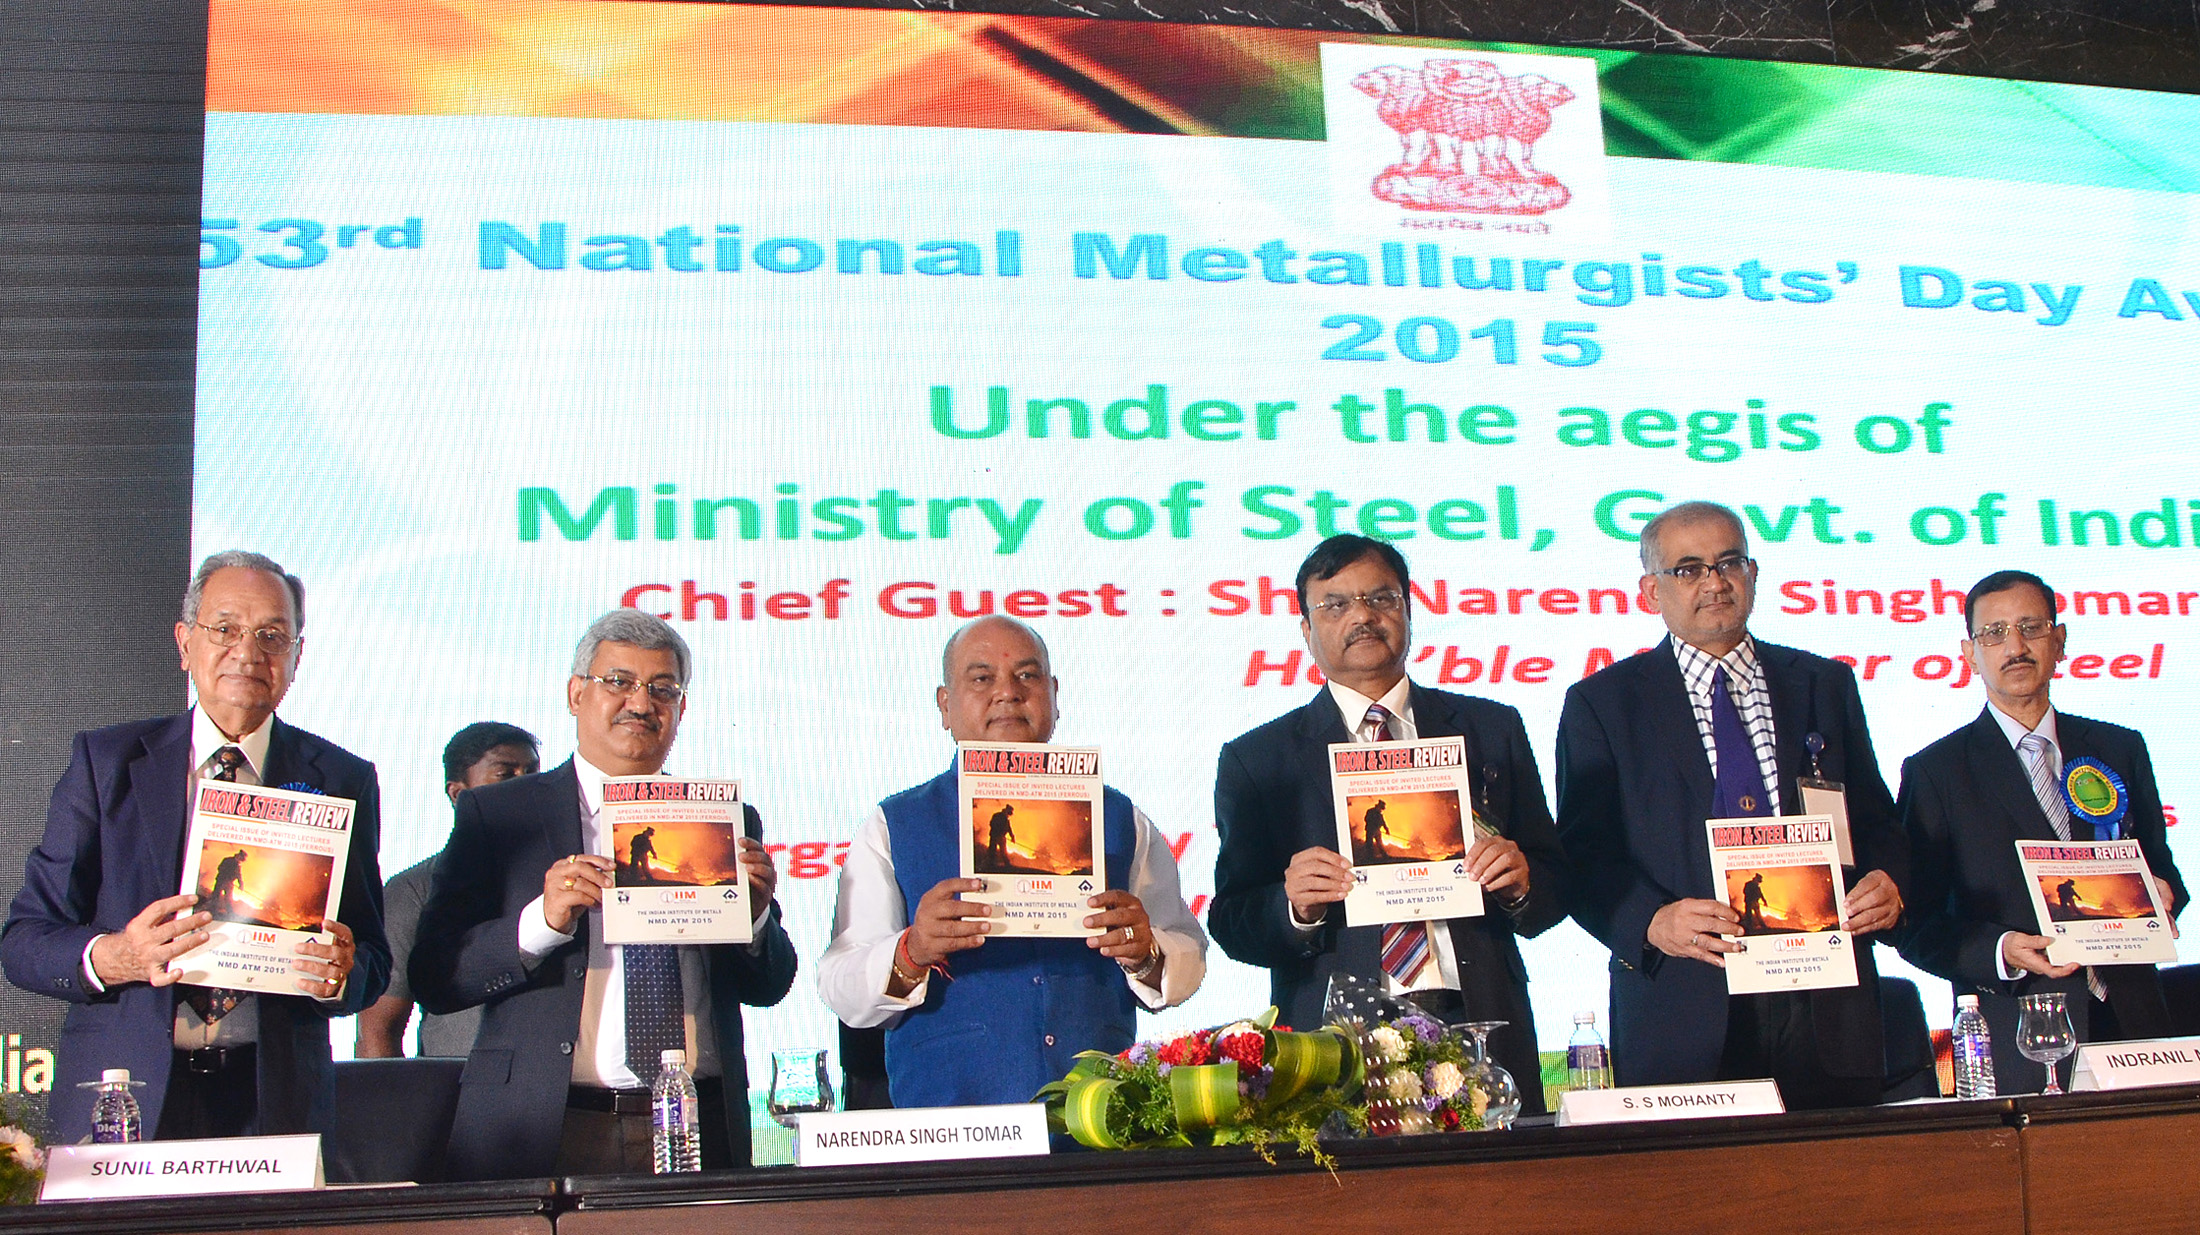 Narendra Singh Tomar releasing the special issue of Iron 